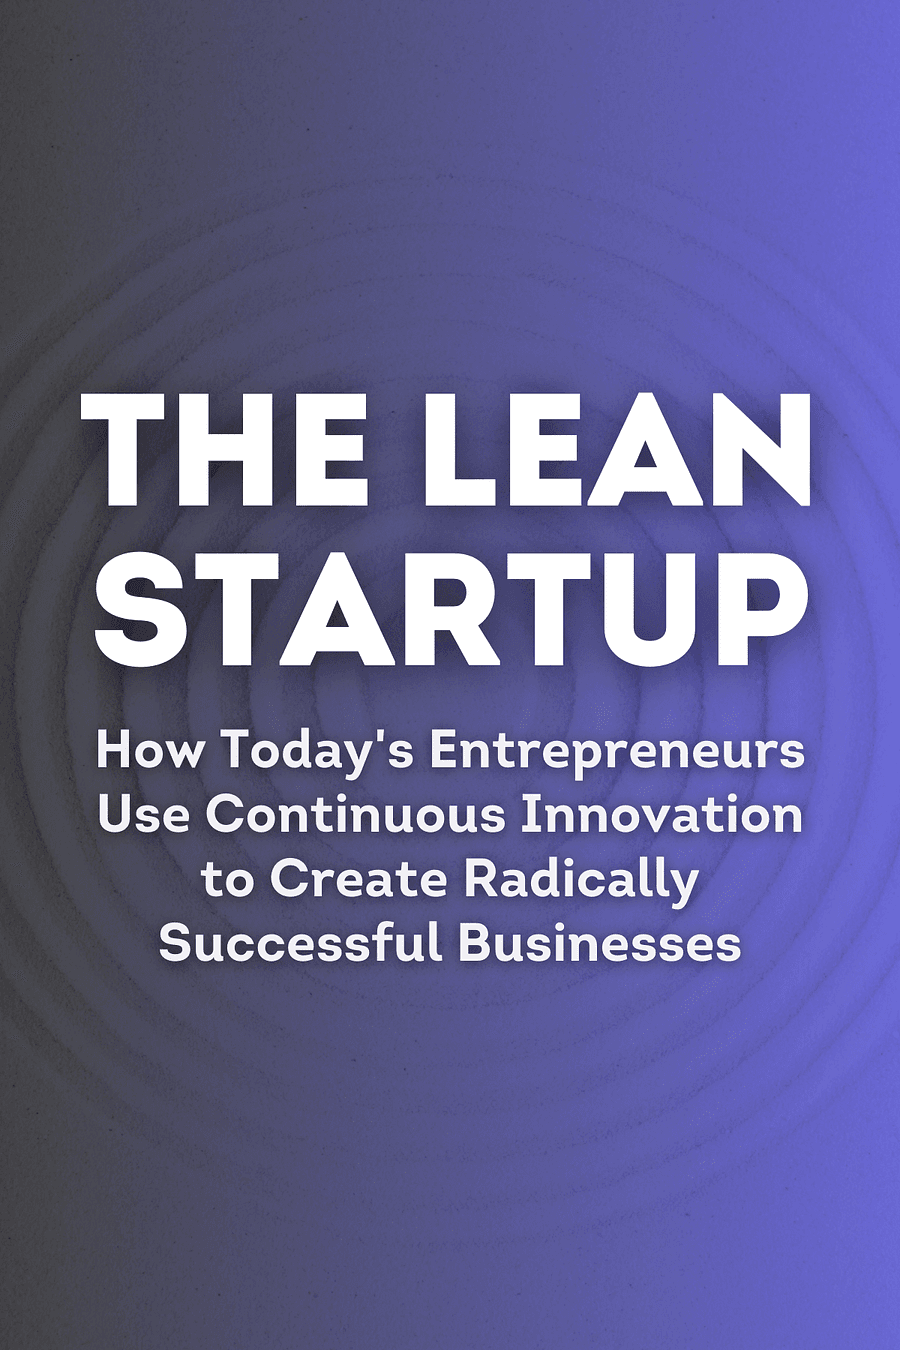 The Lean Startup by Eric Myers - Book Summary